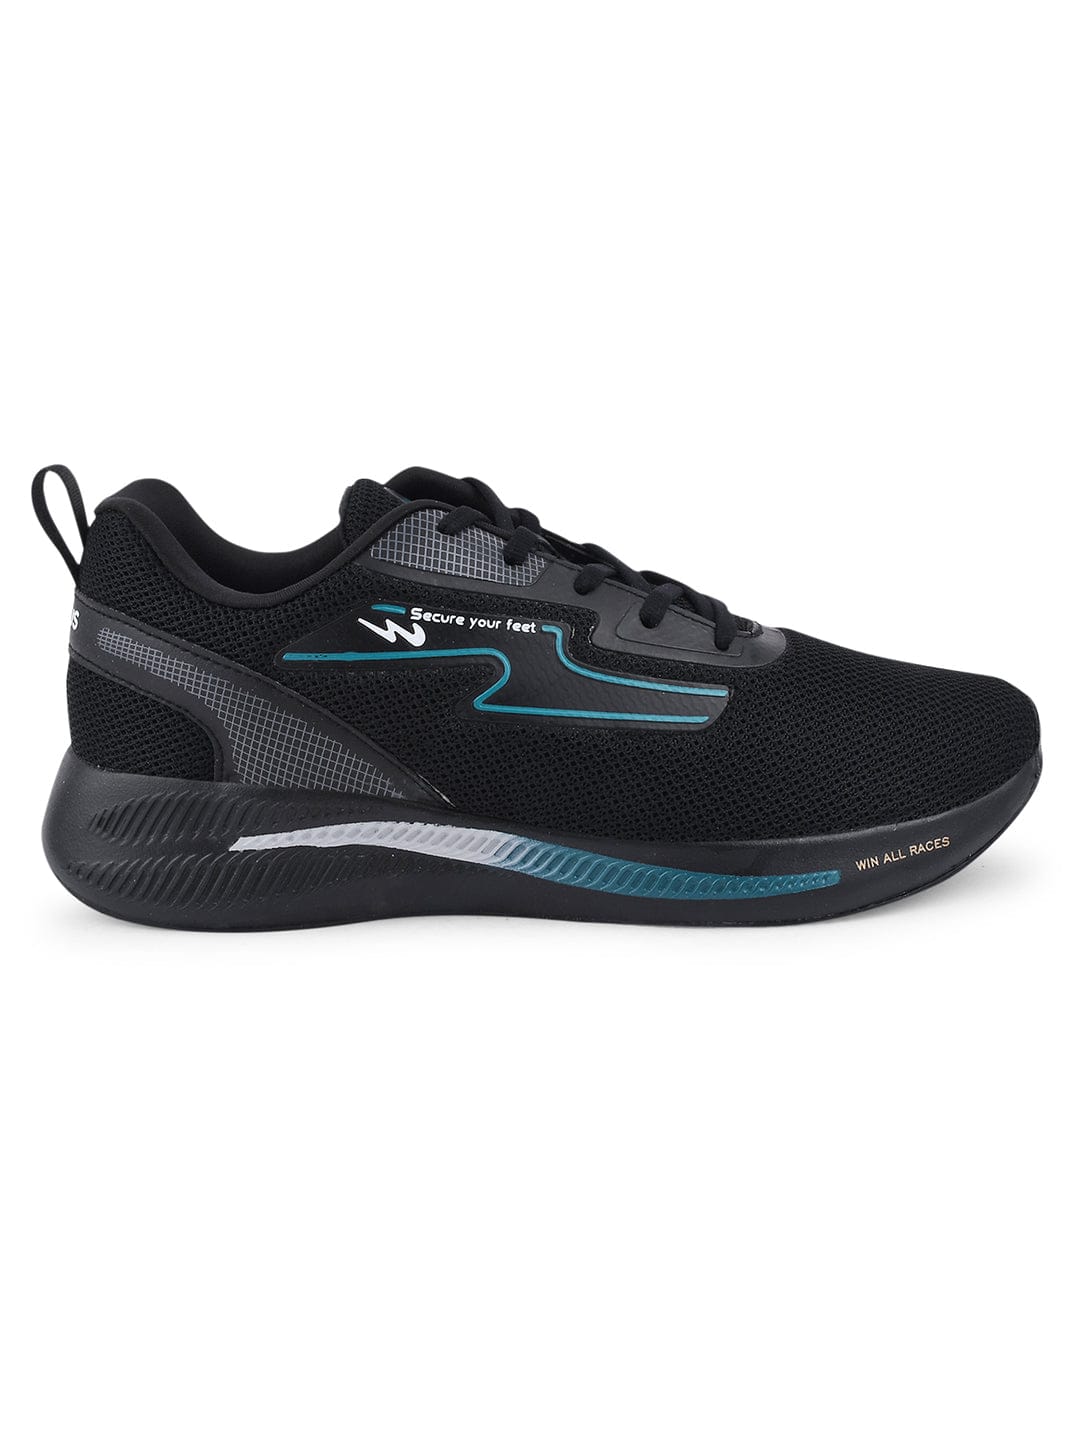 Buy CAMP-RAMBO Black Men's Running Shoes online | Campus Shoes